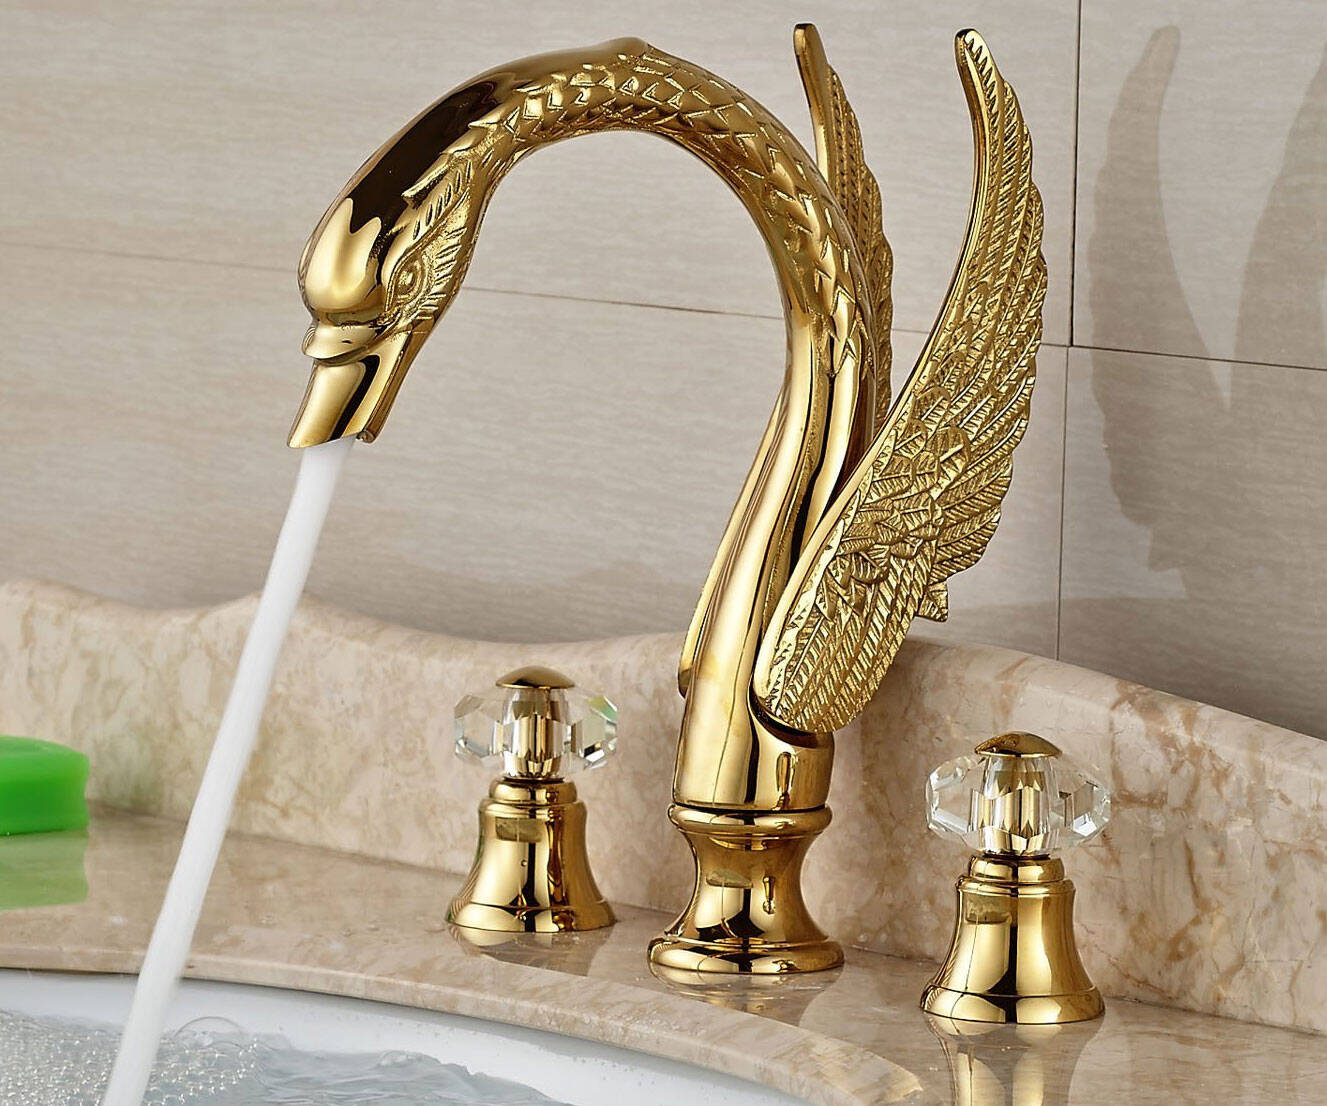 Vomiting Swan Faucet - coolthings.us